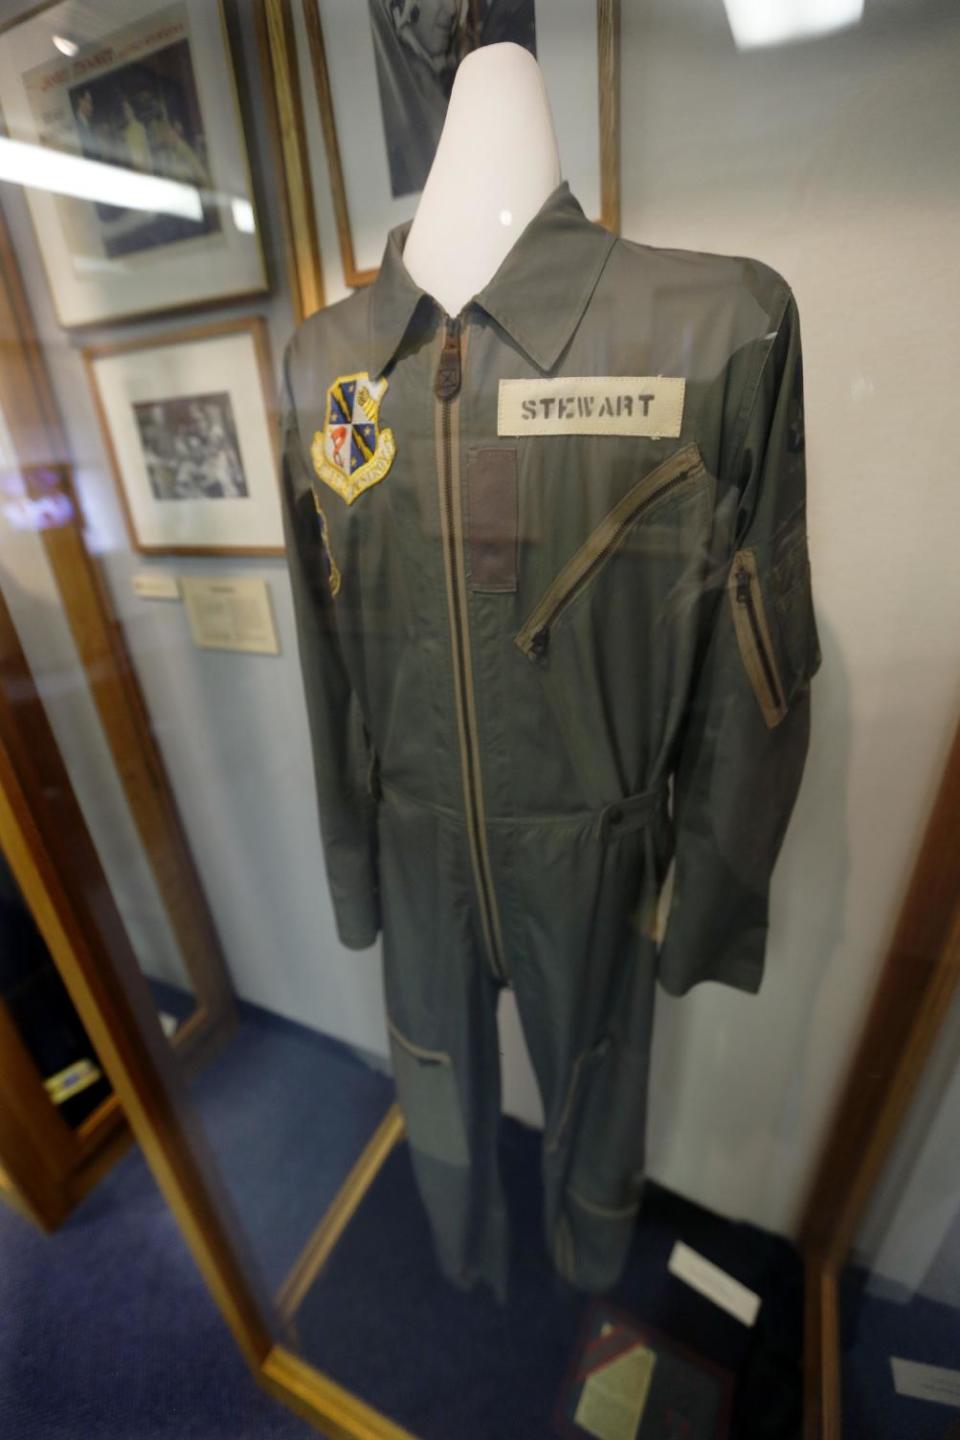 In this photo made on Friday, Dec. 20, 2013, a flight suit that Hollywood legend Jimmy Stewart wore as a member of the Air Force Reserve is on display at the Jimmy Stewart Museum in indiana, Pa. The museum dedicated to the life of the star of many films including the holiday favorite "It's A Wonderful Life" is located in the off-the-beaten track town where Stewart grew up. The museum still attracts visitors from all over the country. It’s full of displays not just about Hollywood, but about Stewart’s service as a bomber pilot in World War II, his well-to-do ancestors, and his family life. (AP Photo/Keith Srakocic)